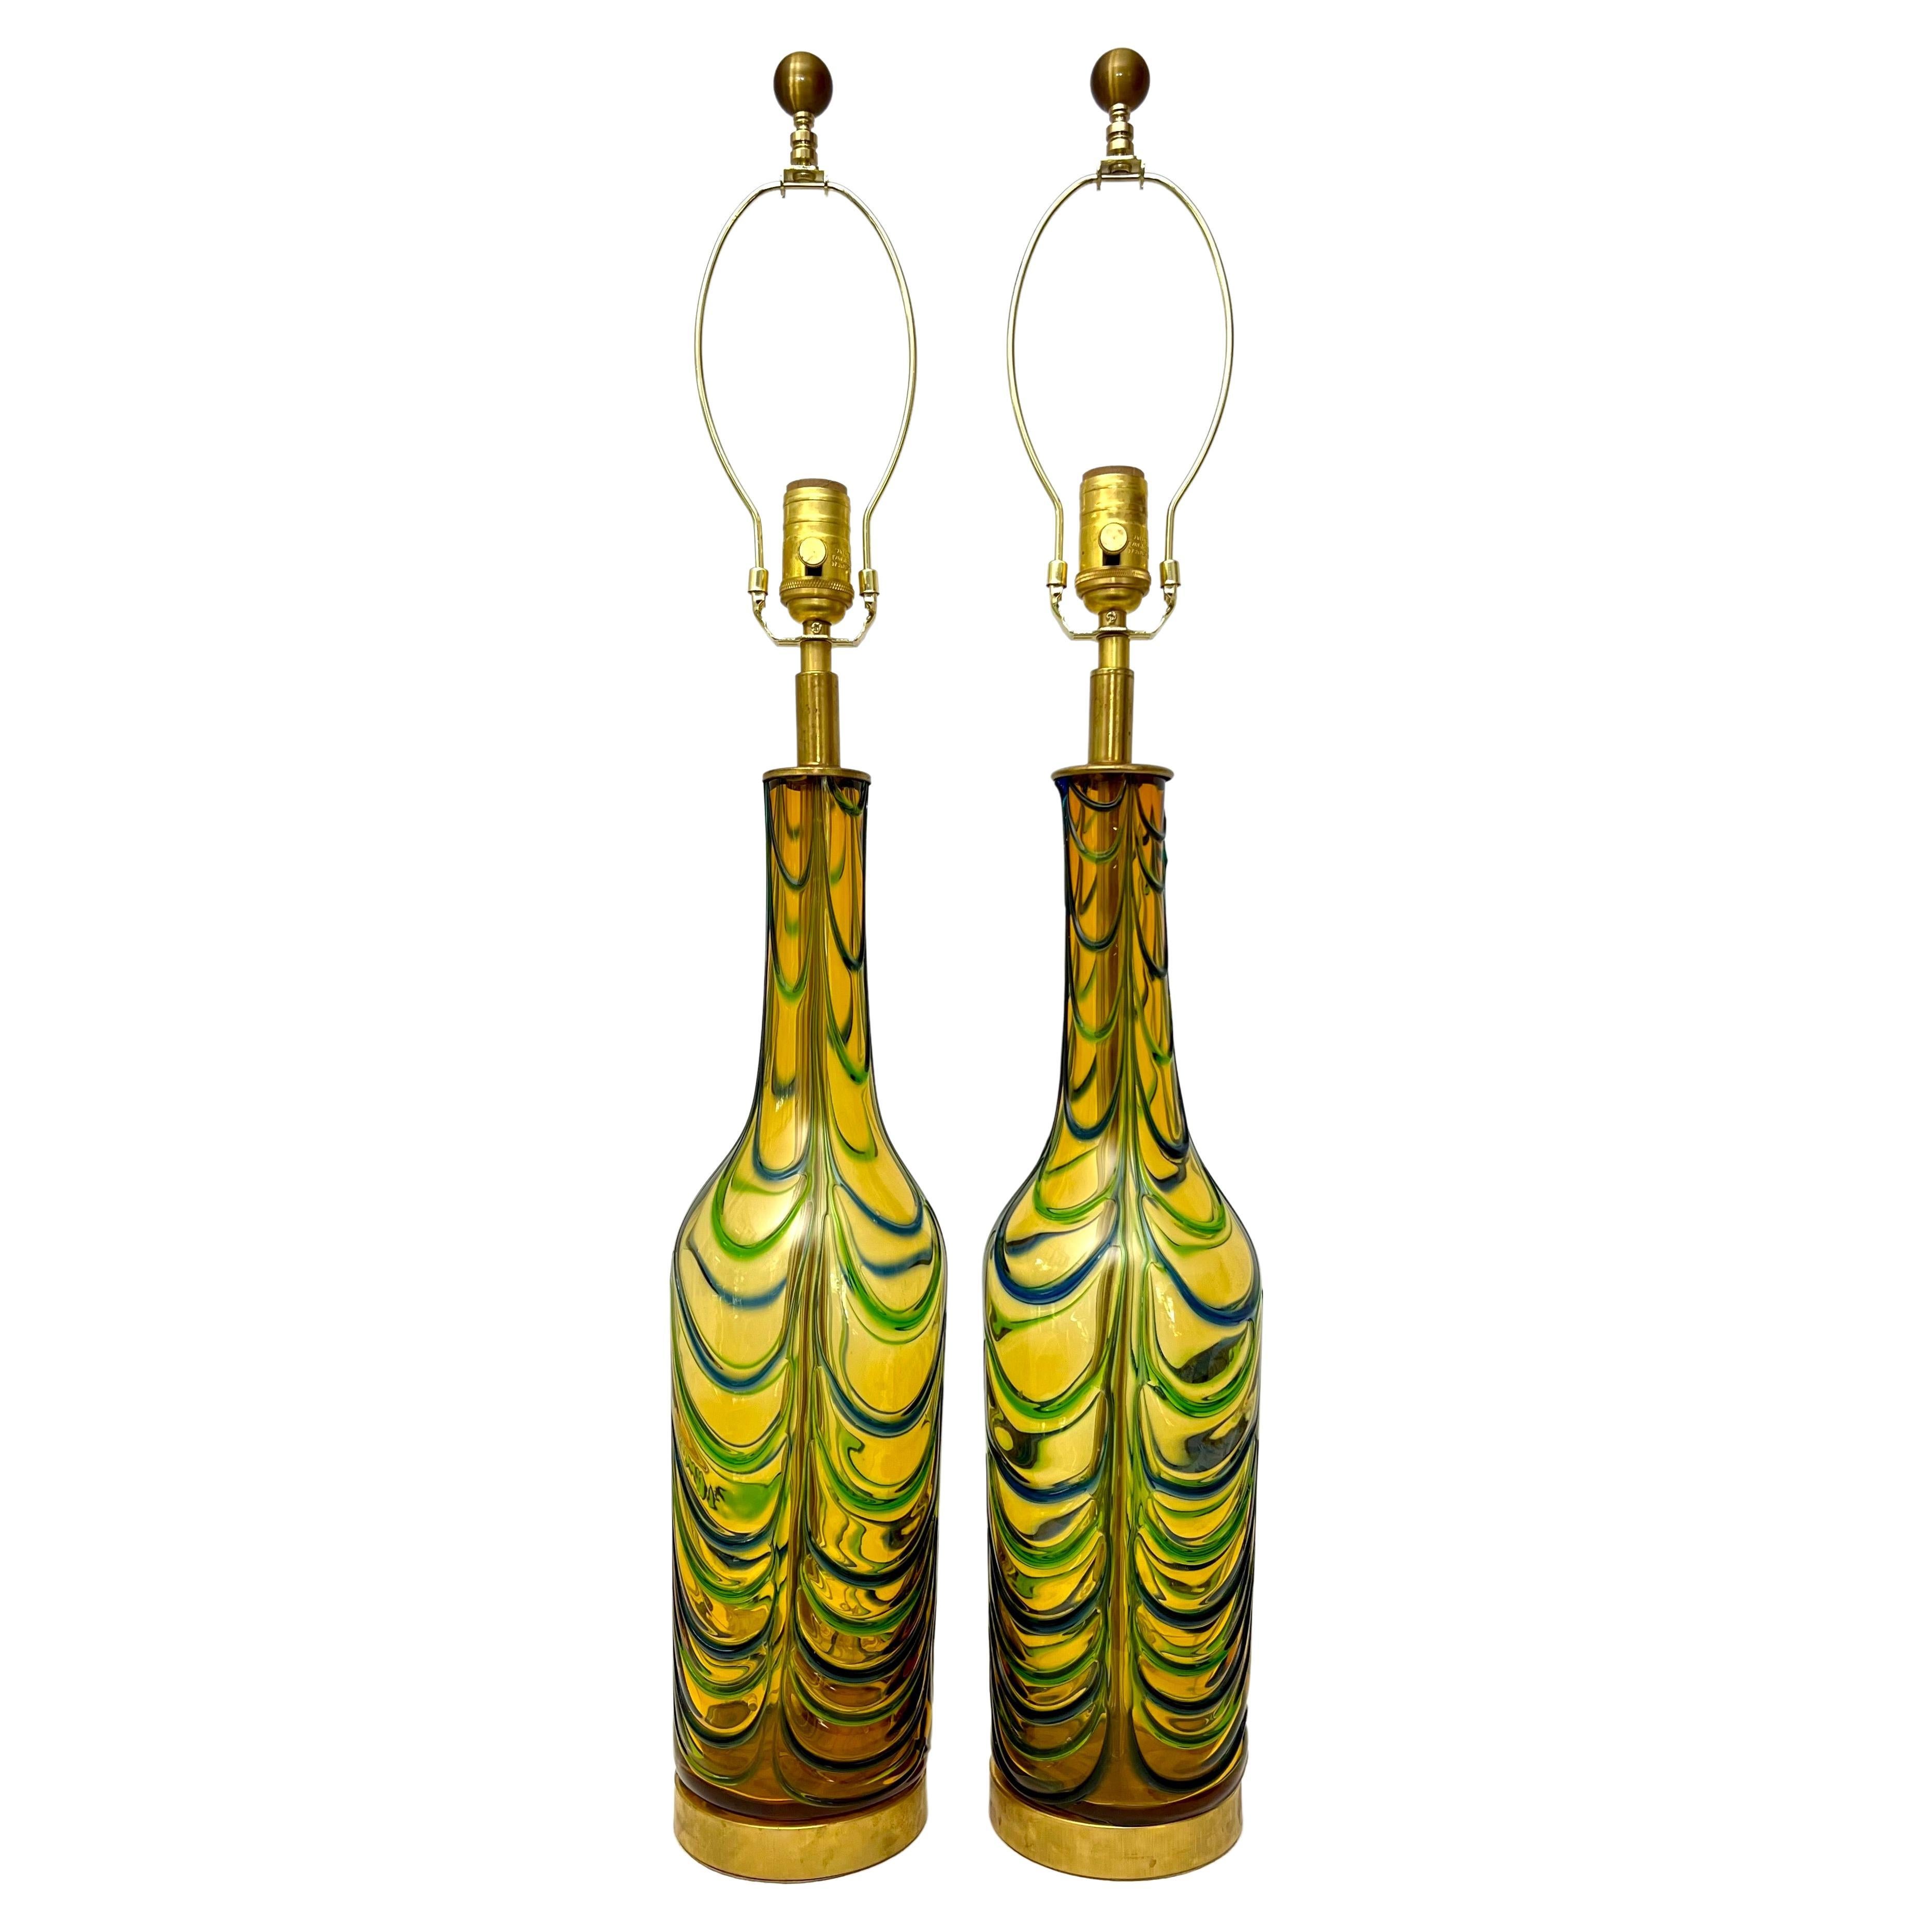 Pair of Seguso Mid Century Murano Lamps with Vibrant Green, Blue and Gold Colors